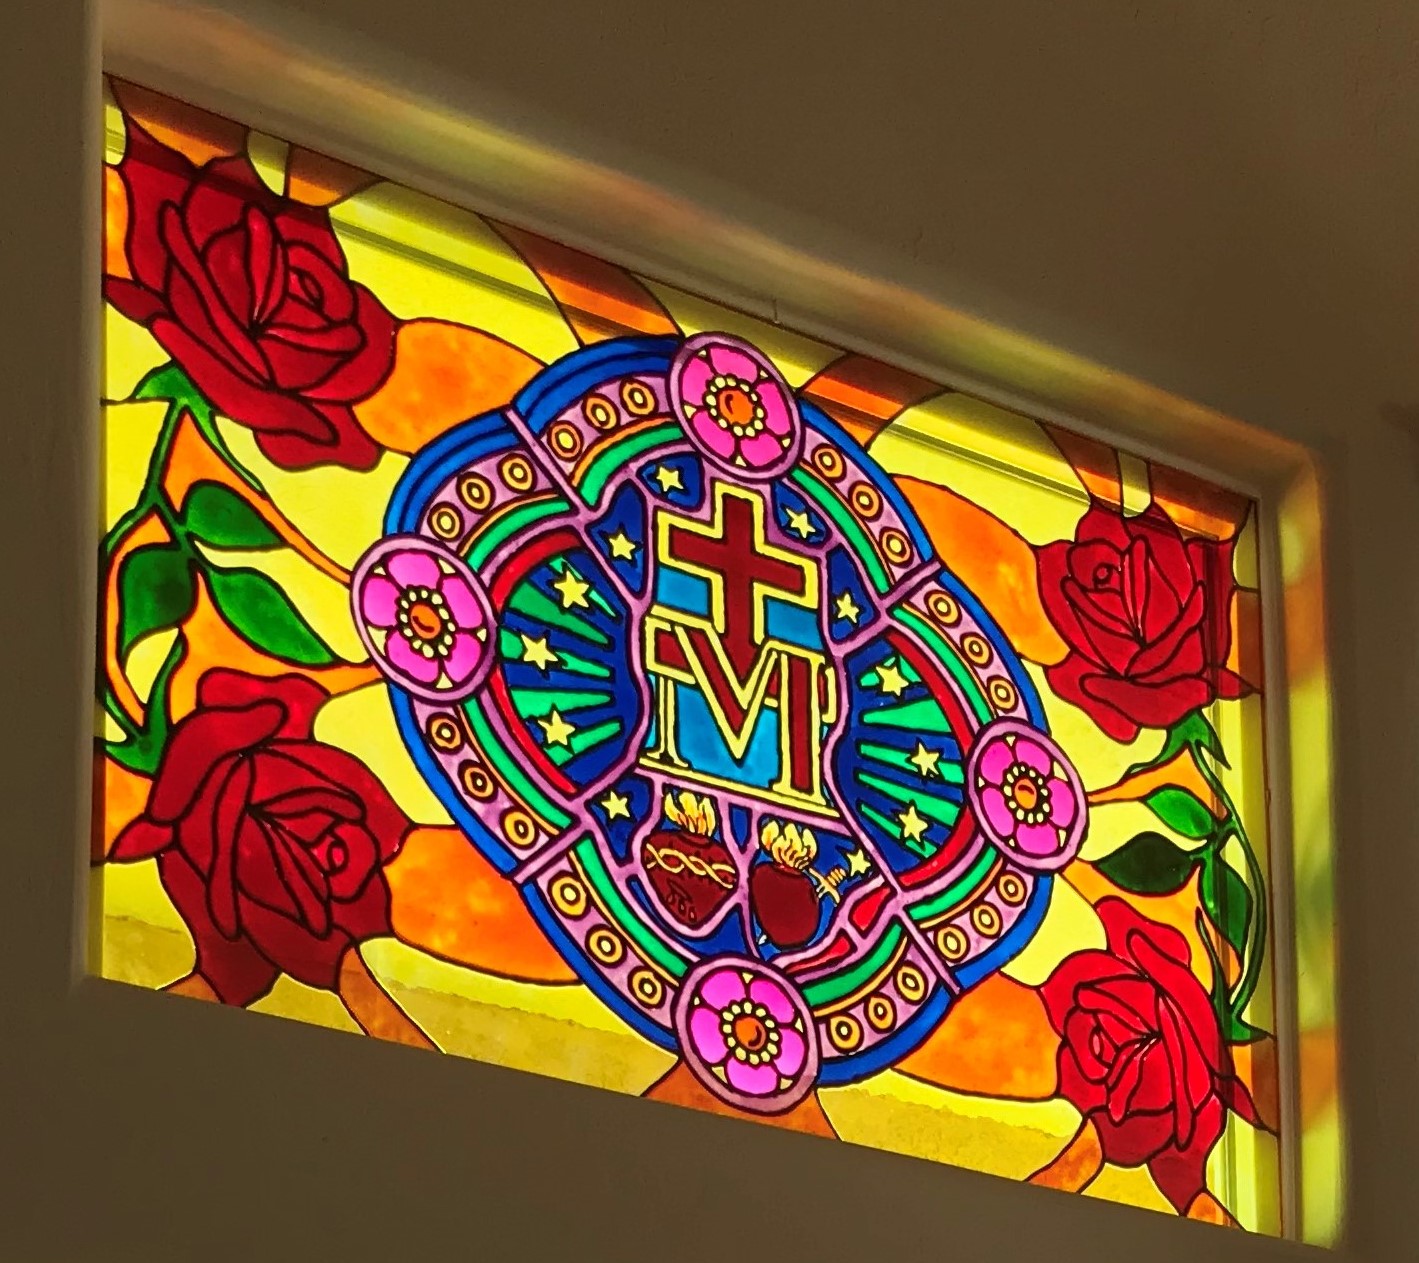 Faux Stained Glass by Painting a Window